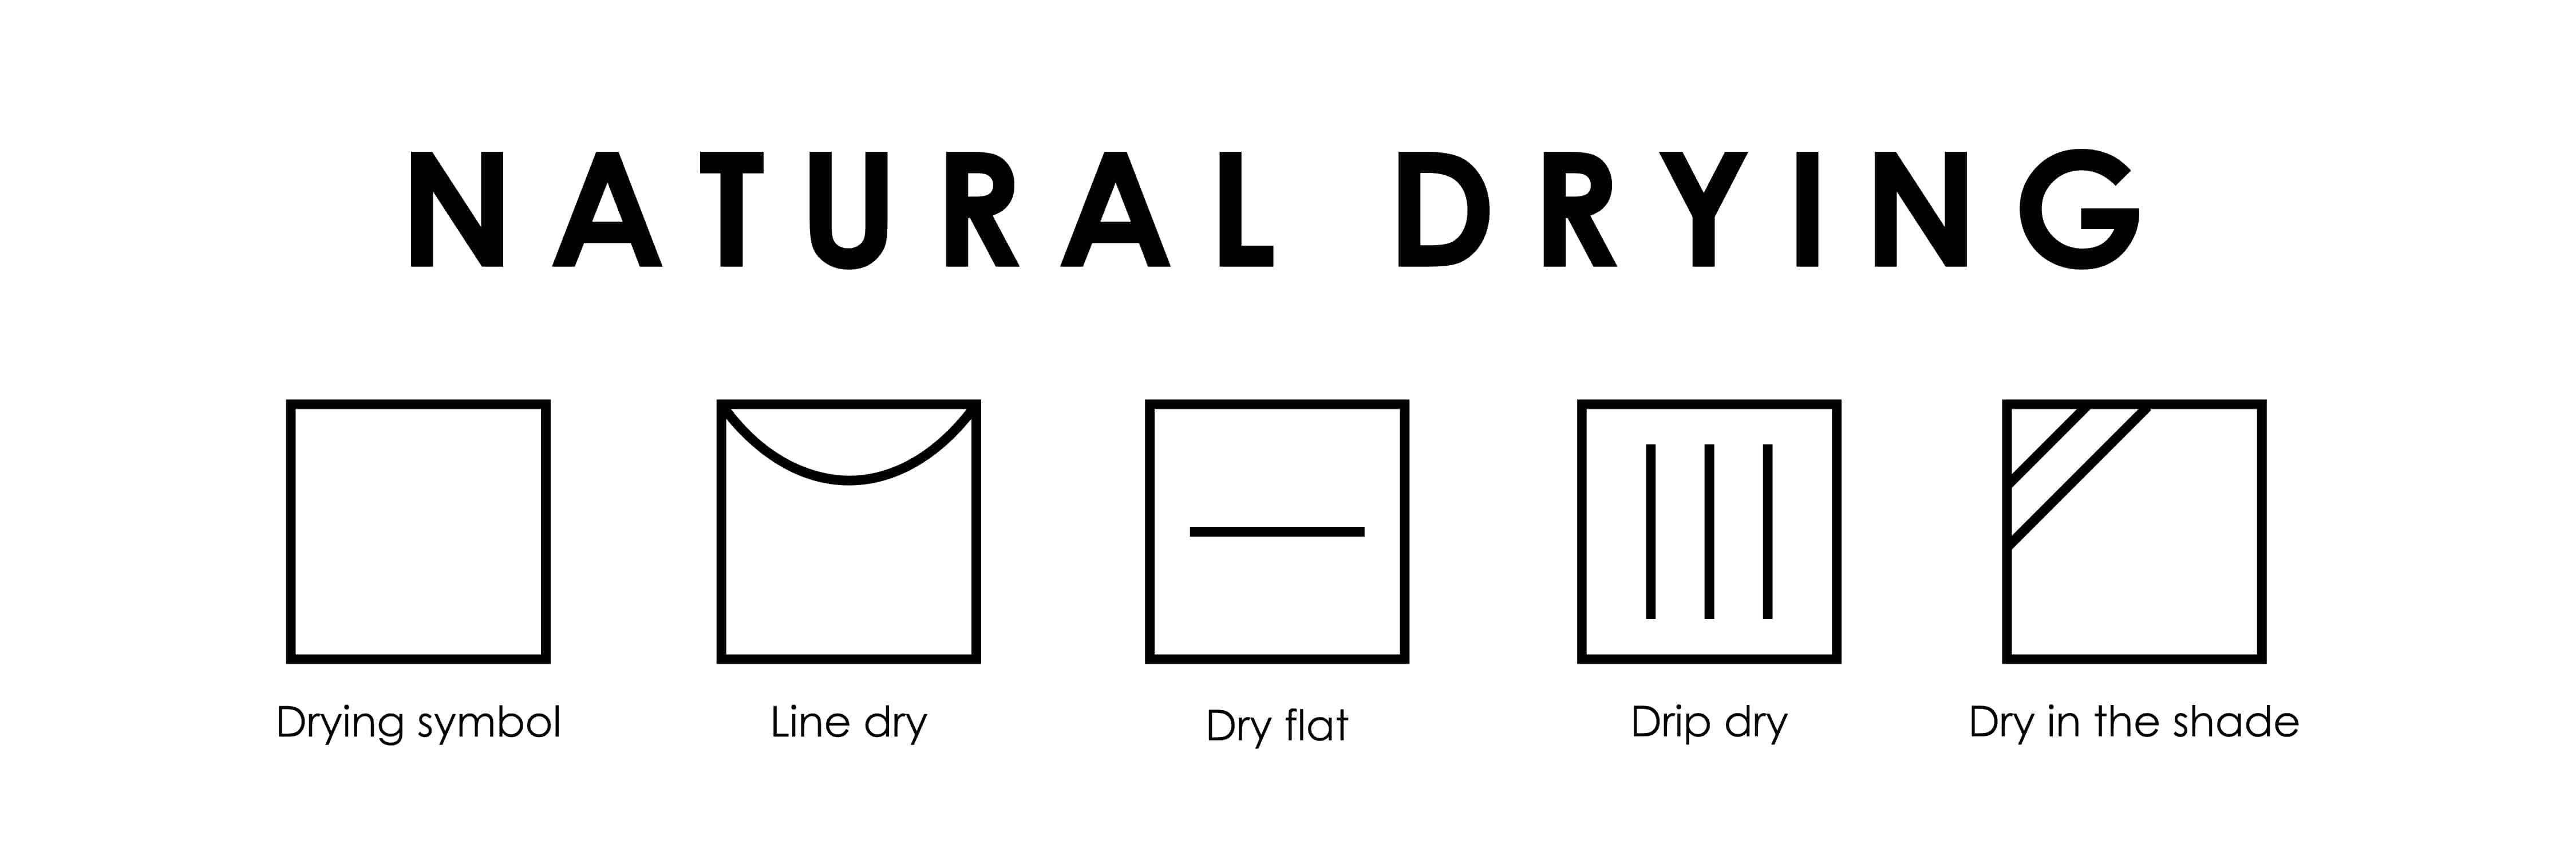 What Does Dry Flat Mean? Everything You Need To Know